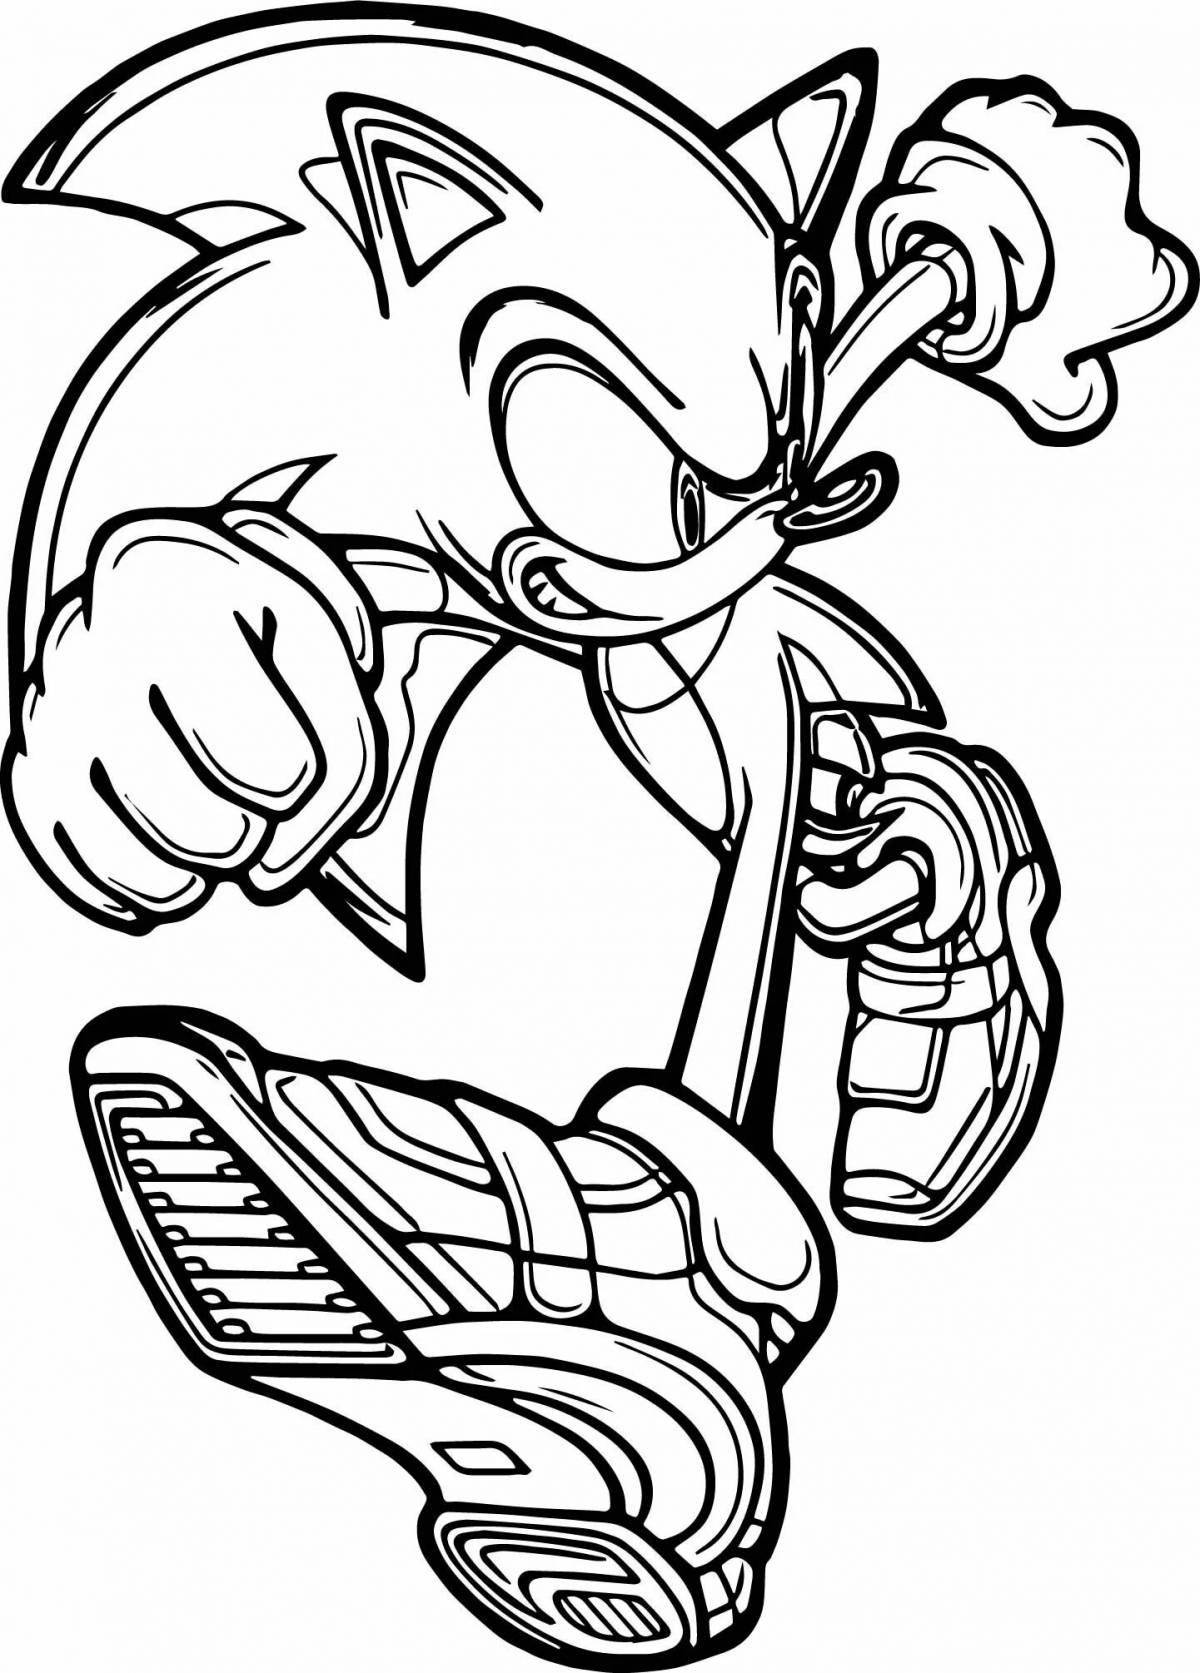 Venom sonic awesome coloring page